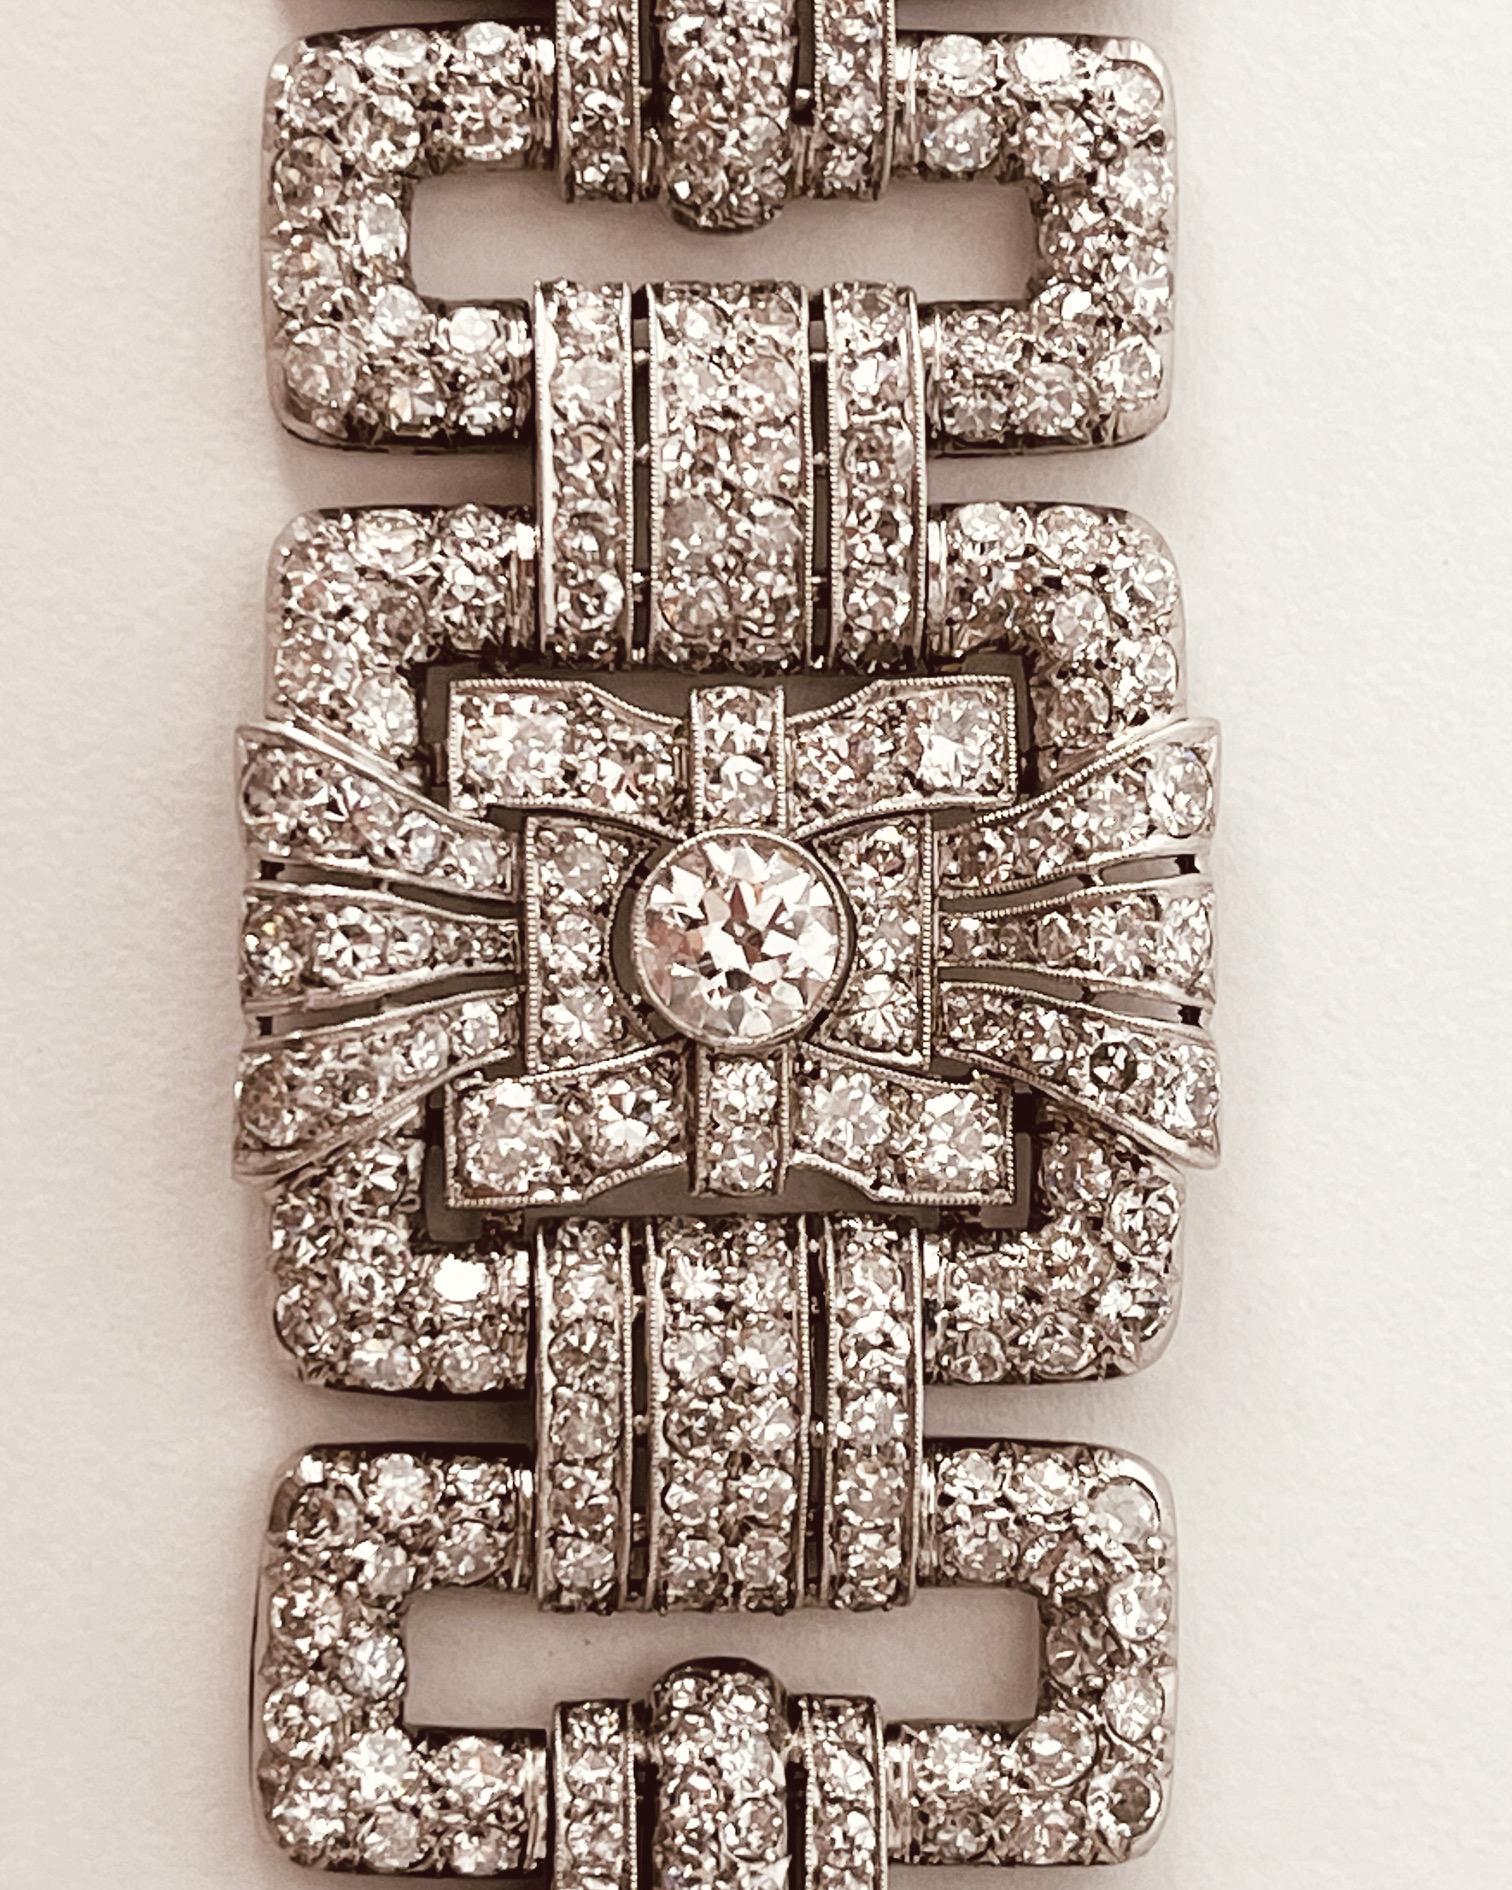 An Art Deco diamond bracelet. Set throughout with brilliant and circular-cut diamonds. The largest diamonds estimated to weigh 1ct each. Total diamond weight approximately 25cts. French marks. Circa 1935. 19cm in length and approximately 3.1cm wide.